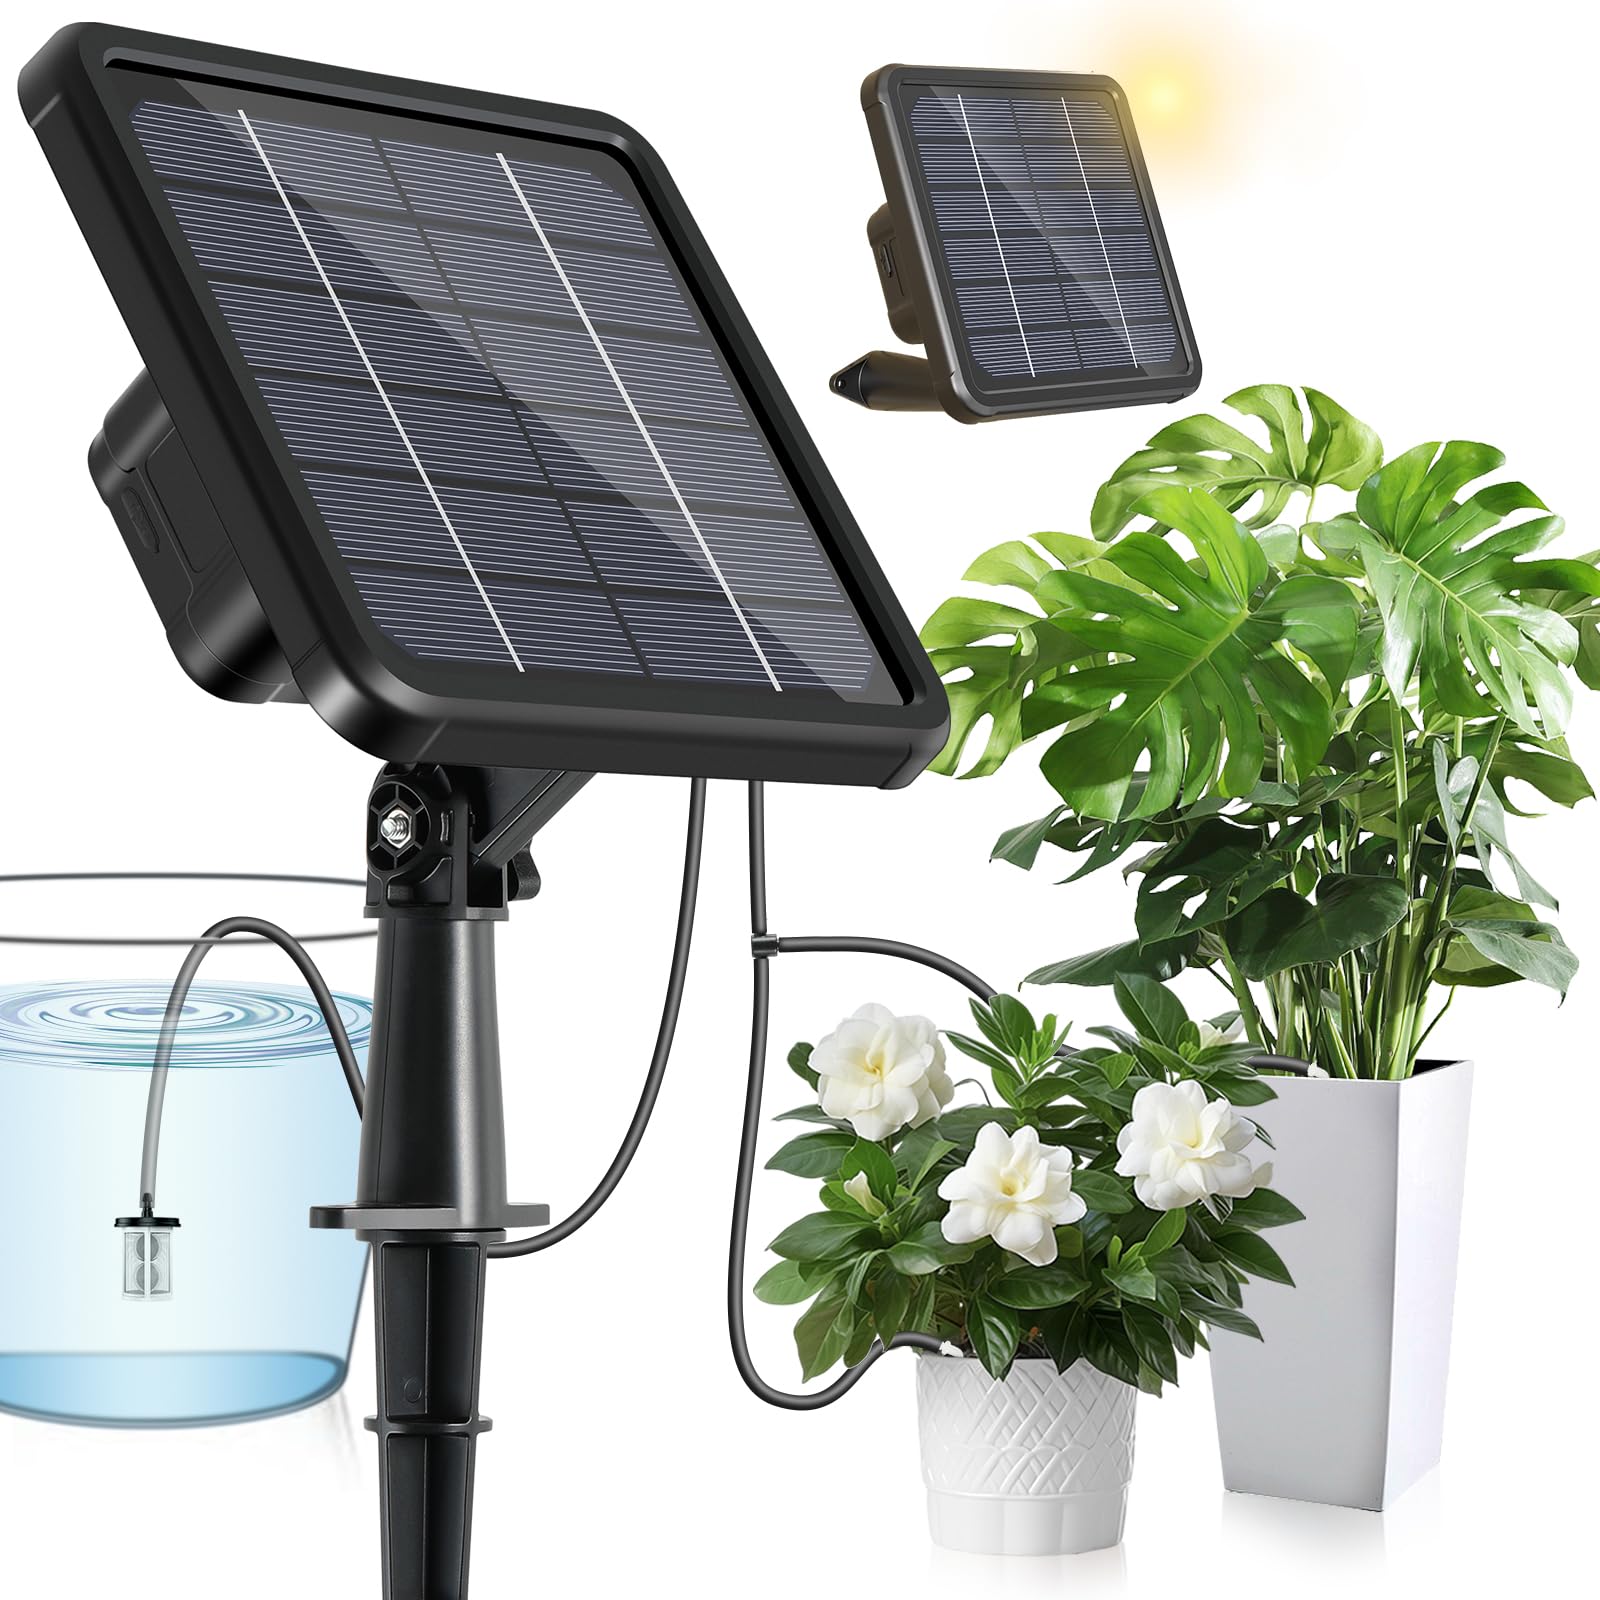 Solar Automatic Drip Irrigation Kits, Support 15 Potted Plants, Automatic Watering System for Indoor and Outdoor Garden, Eco-Friendly and Cost-Effective - Plantonio